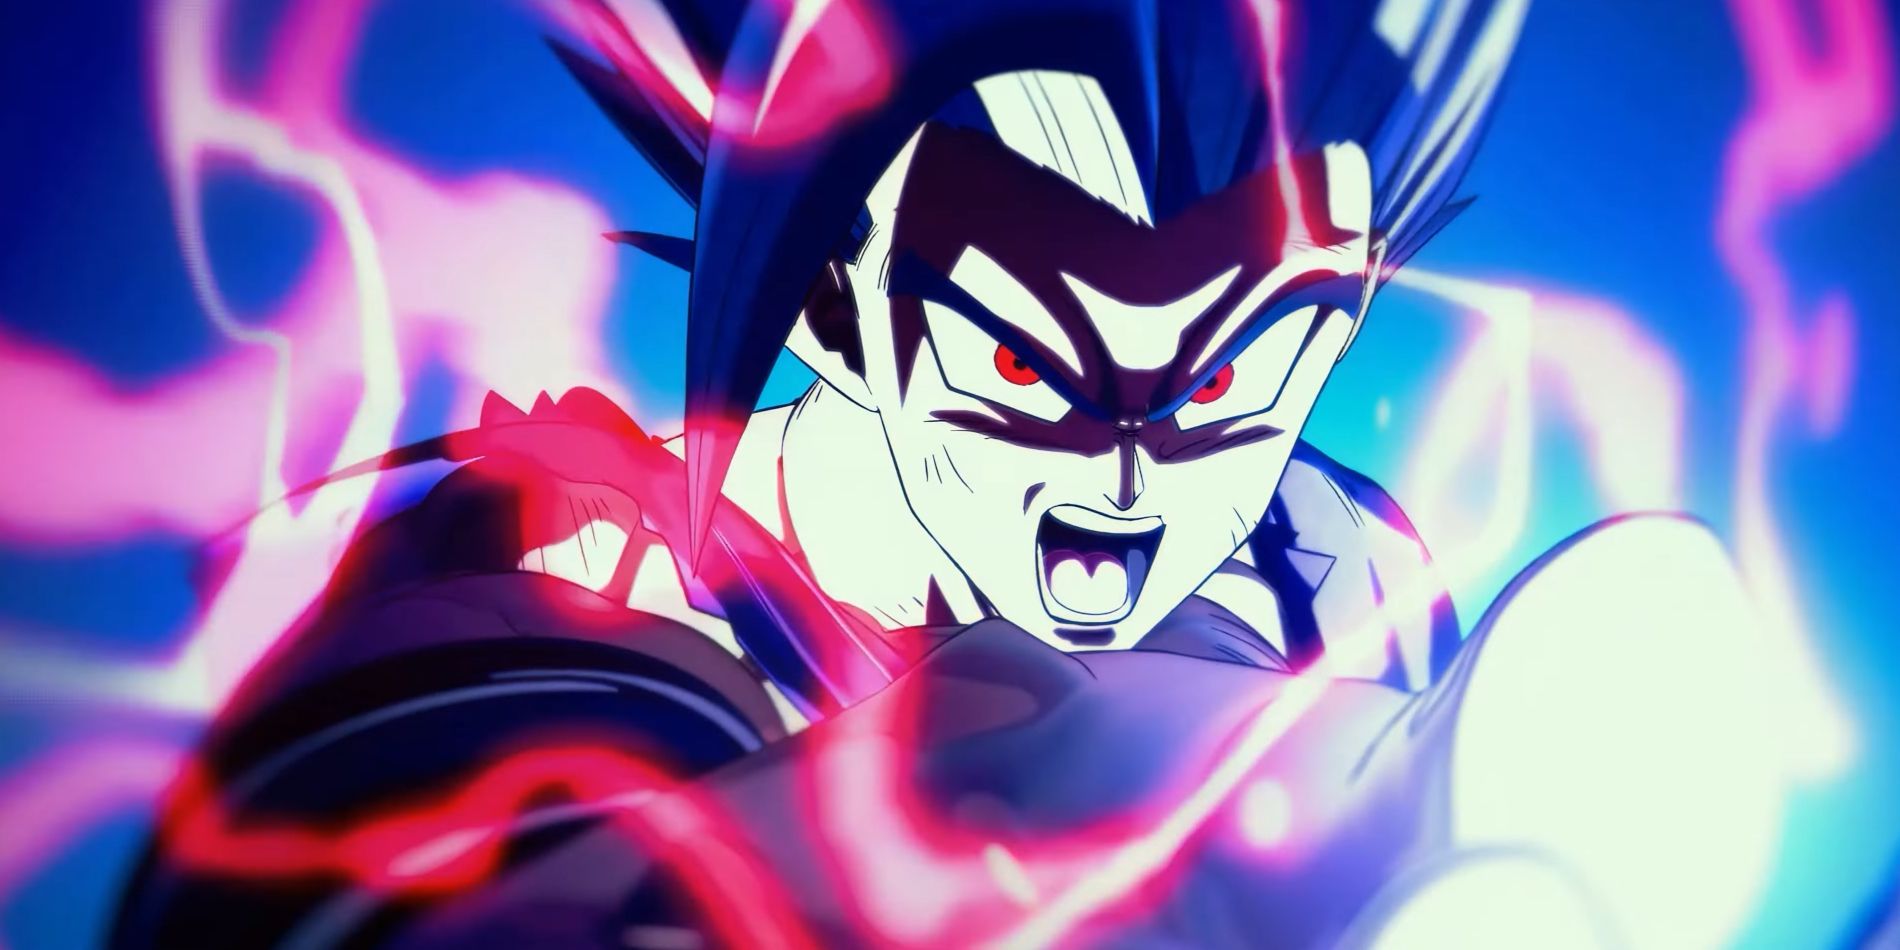 Screenshot from DRagon Ball Super Hero movie shows Beast Gohan yelling and surrounded by red lightning as he is about to launch his special beam cannon.